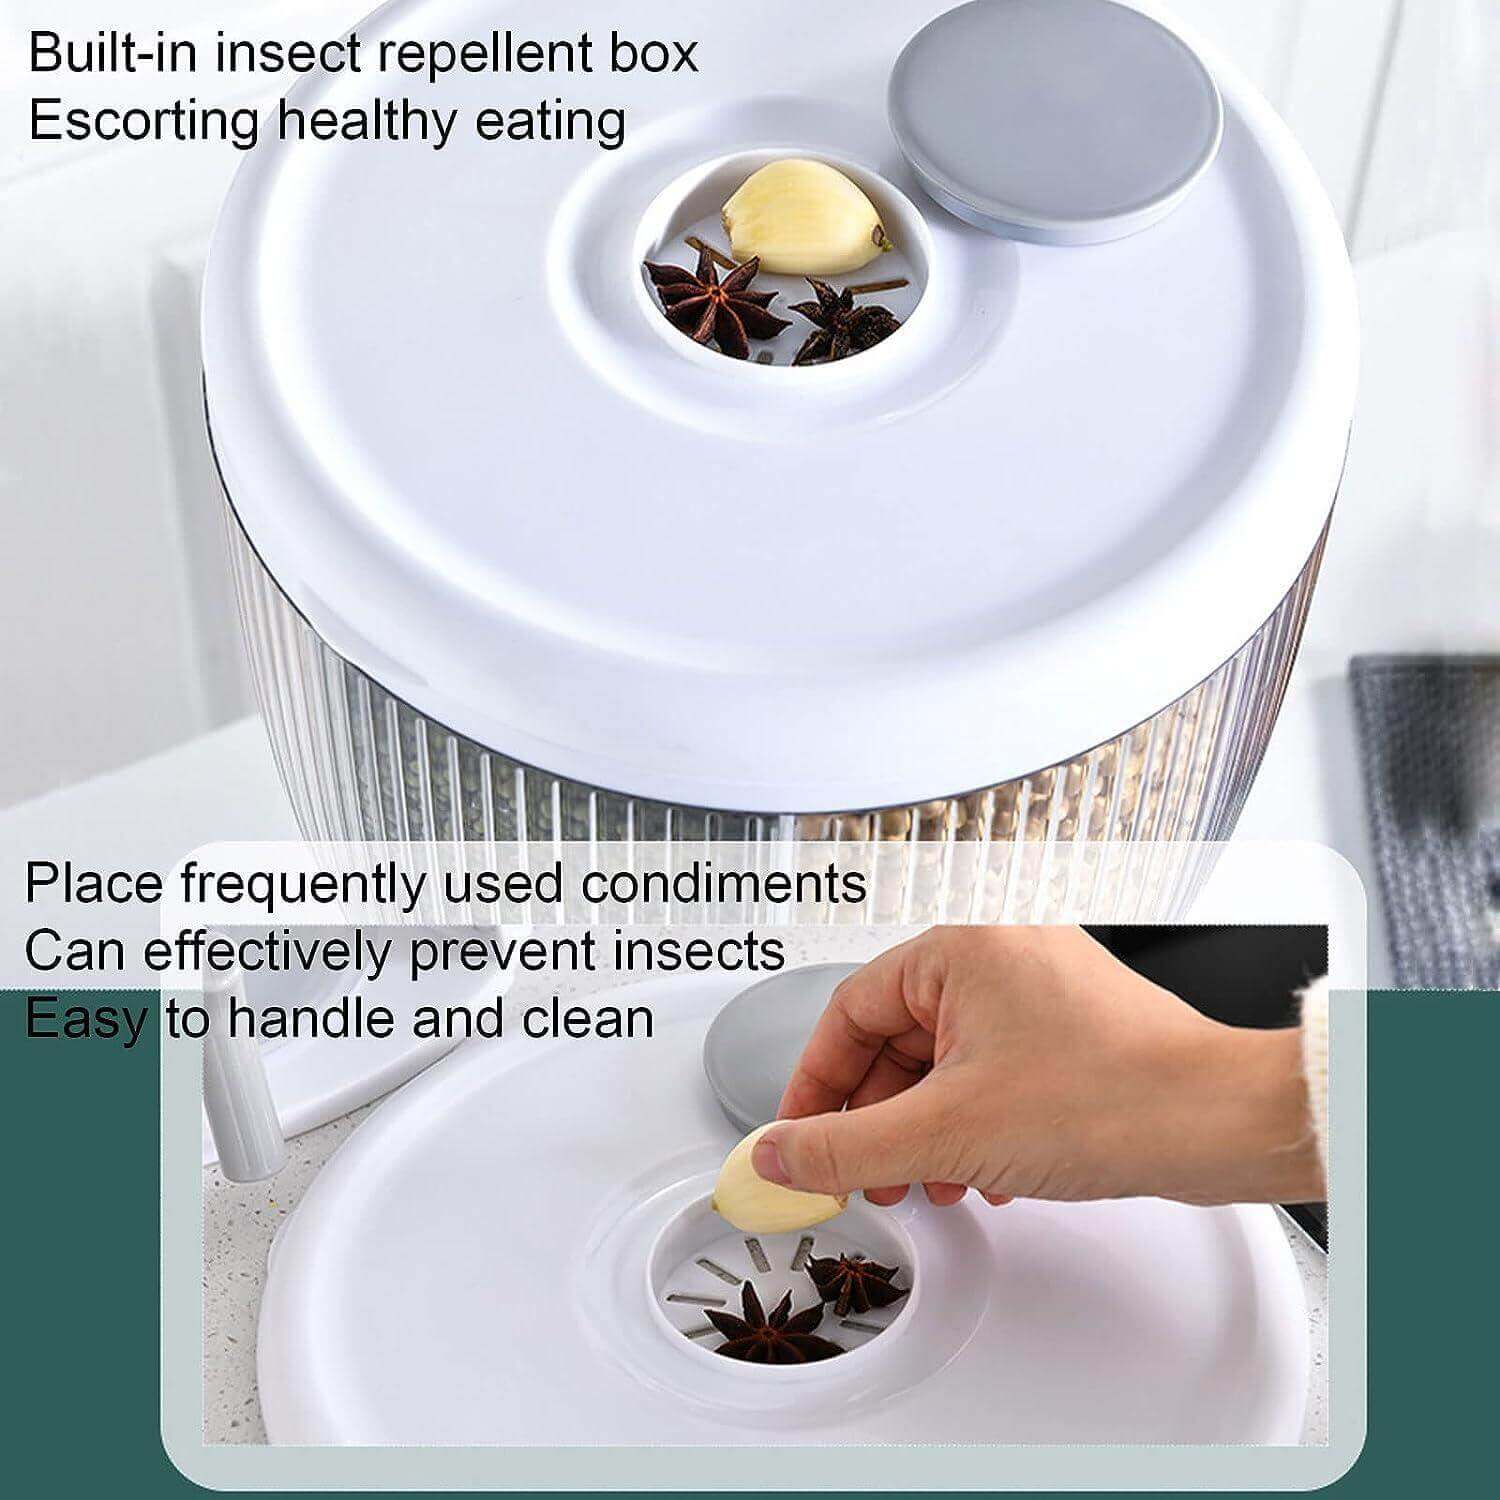 Kitchen multipurpose container, Multi Compartment Grain Storage Box Sealed, 360° Rotating Dry Food Dispenser - enyaa